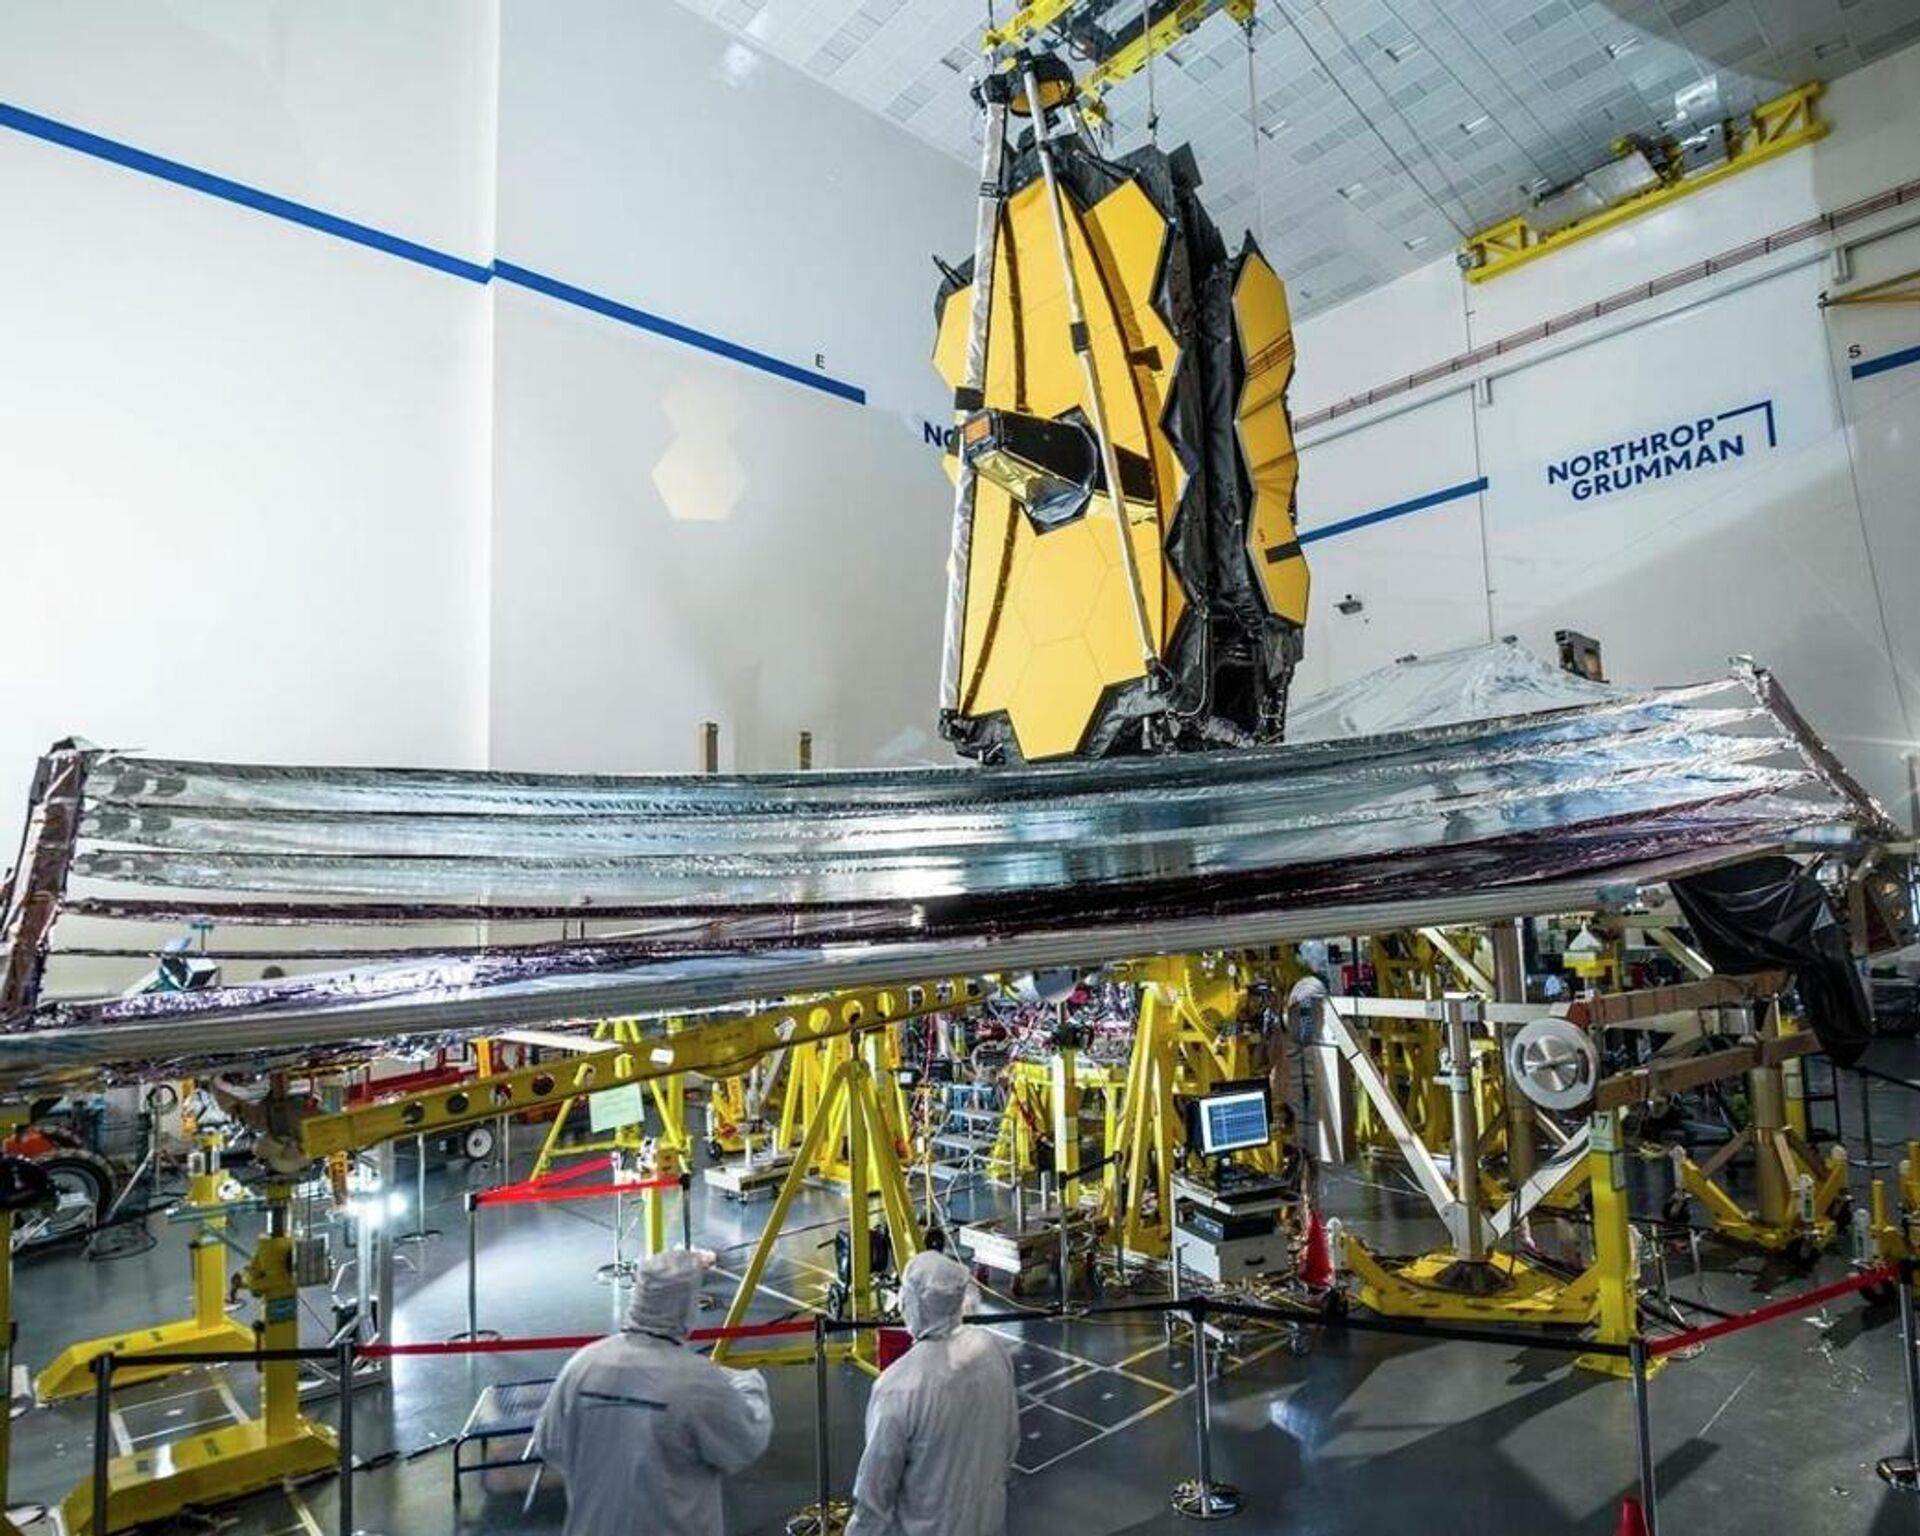 On Jan. 4, 2022, engineers successfully completed the deployment of the James Webb Space Telescope’s sunshield, seen here during its final deployment test on Earth in December 2020 at Northrop Grumman in Redondo Beach, California. The five-layer, tennis court-sized sunshield is essential for protecting the telescope from heat, allowing Webb’s instruments to cool down to the extremely low temperatures necessary to carry out its science goals. - Sputnik International, 1920, 05.01.2022